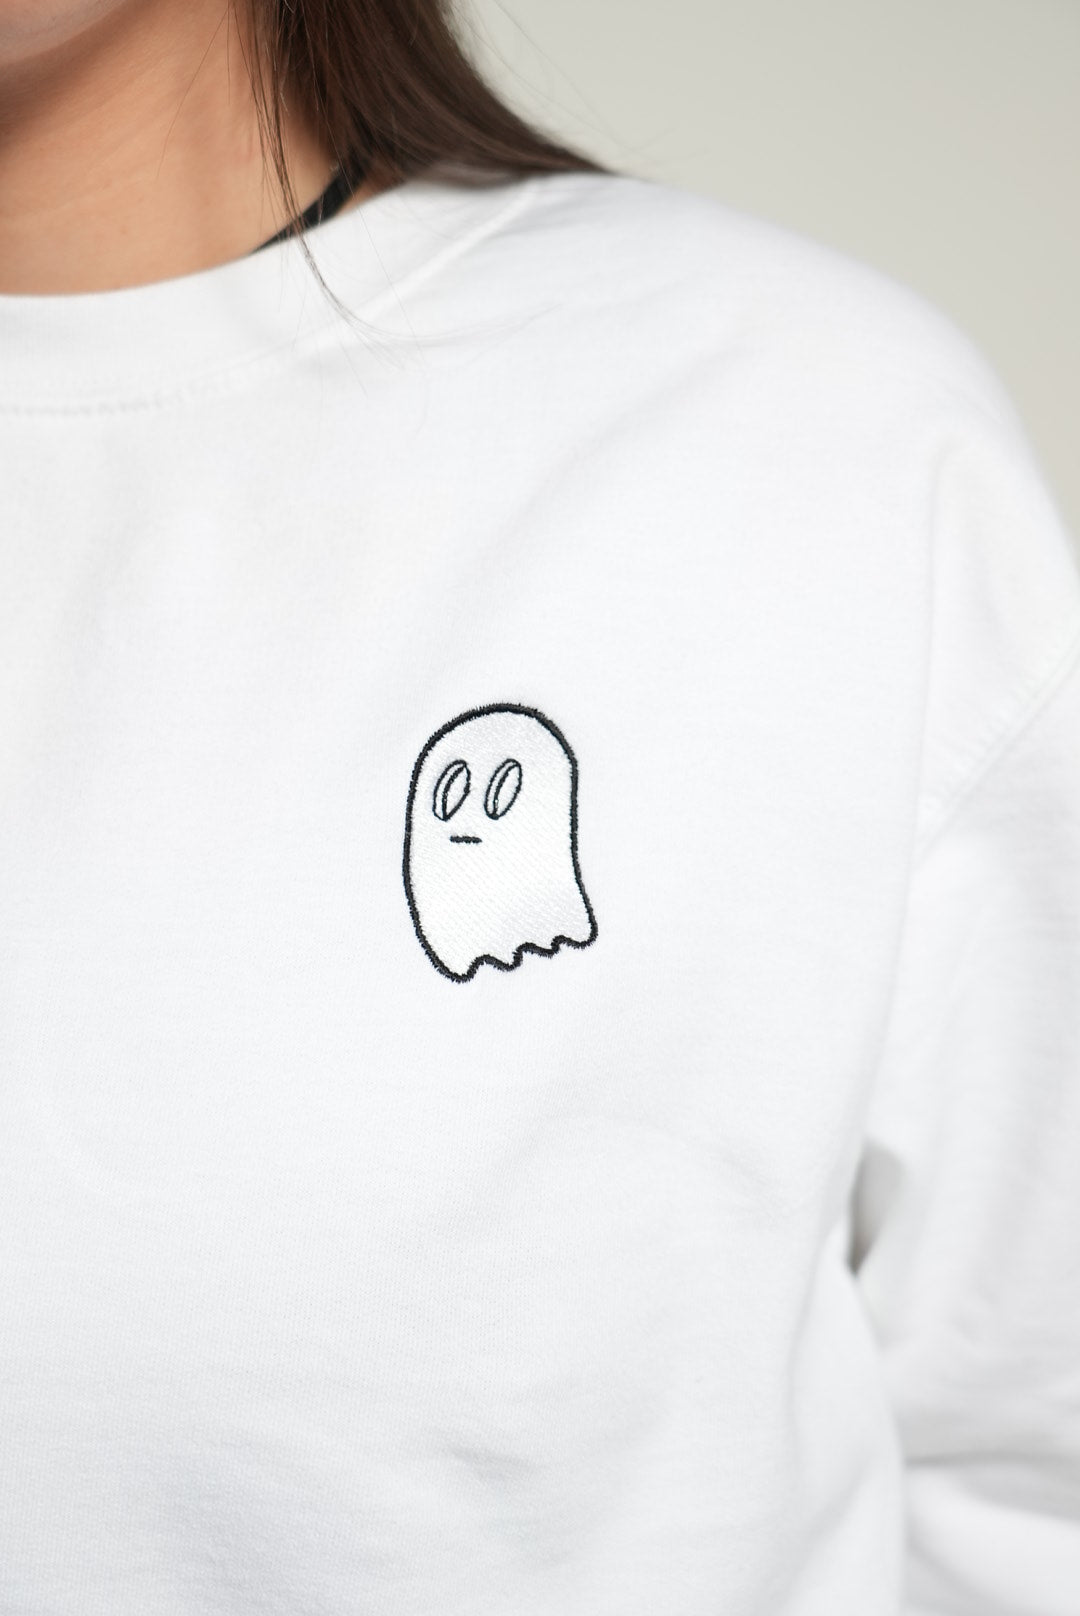 Unisex Embroidered Ghost Crewneck white